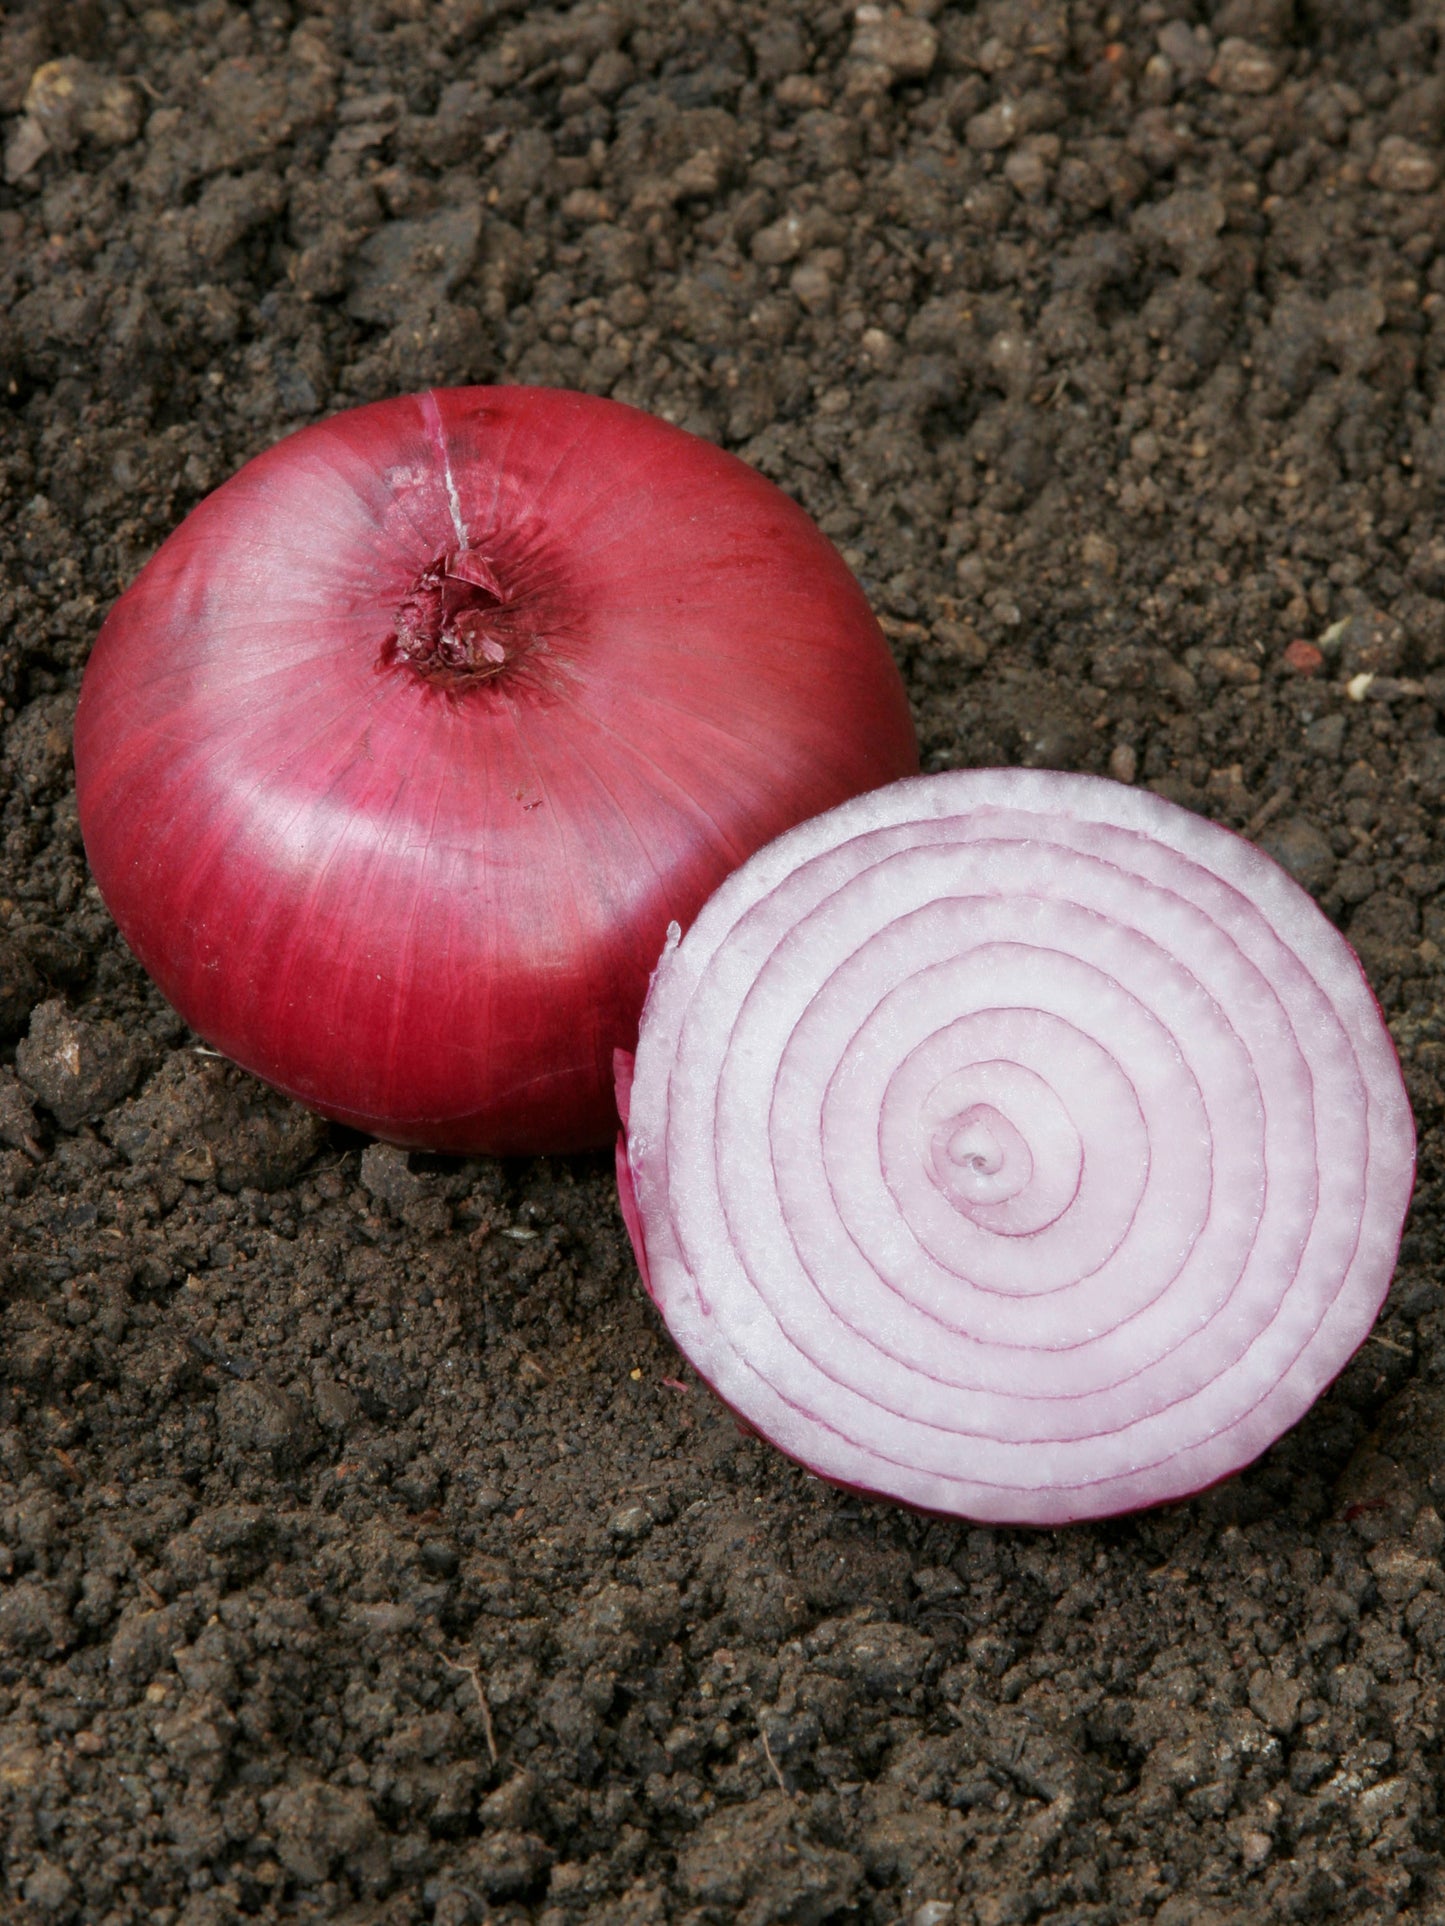 ONION RED CREOLE